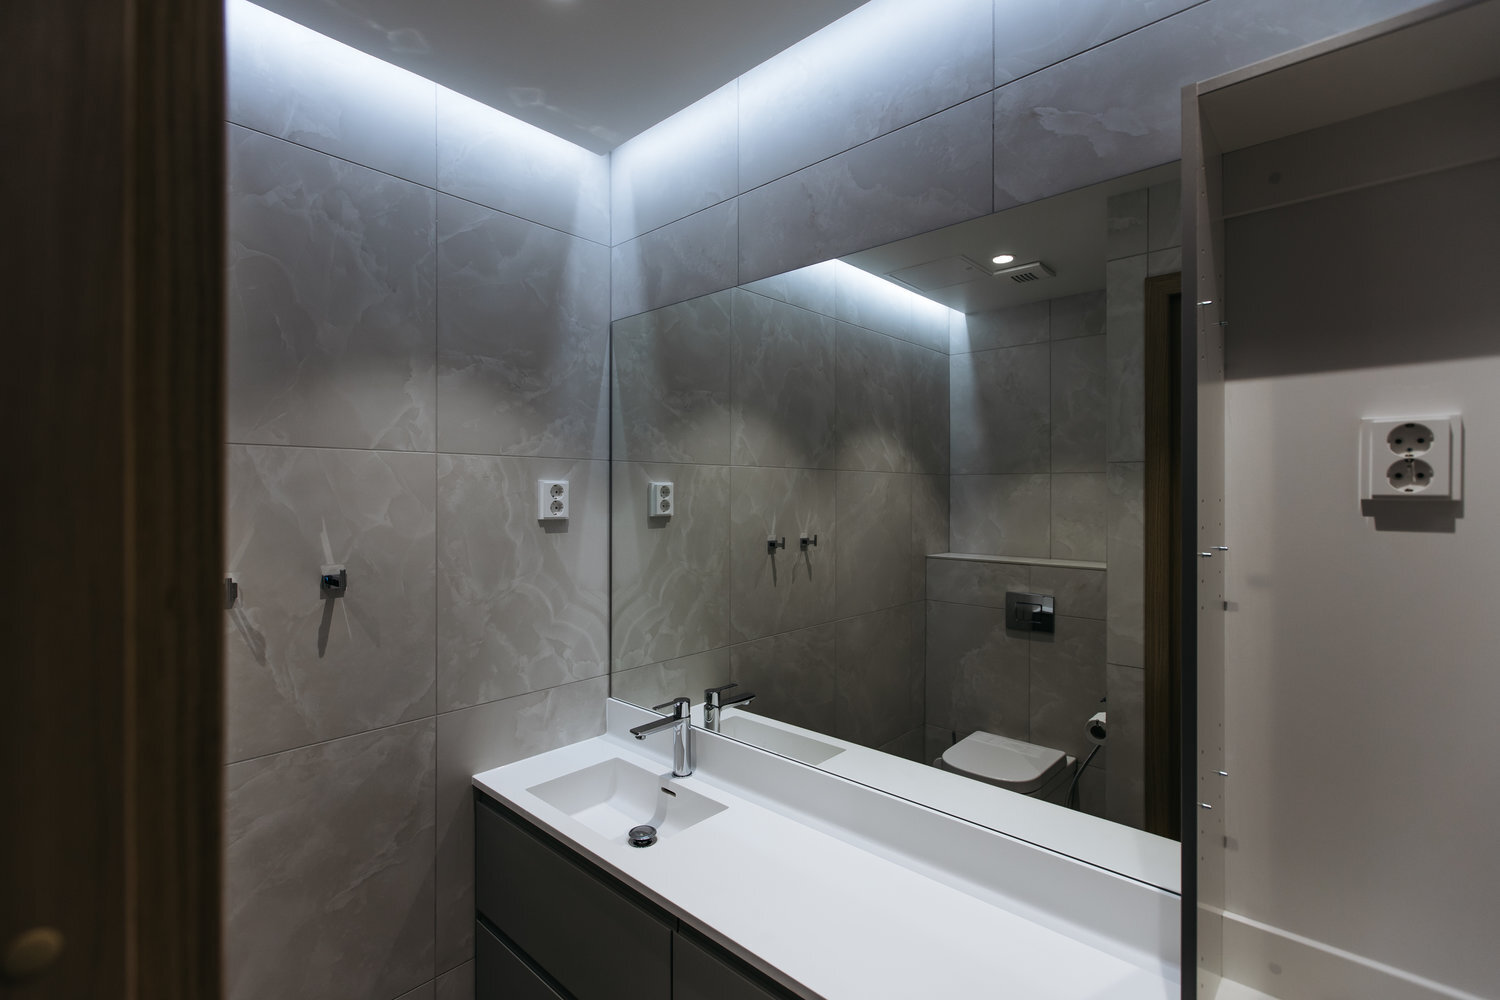 What is indirect lighting?